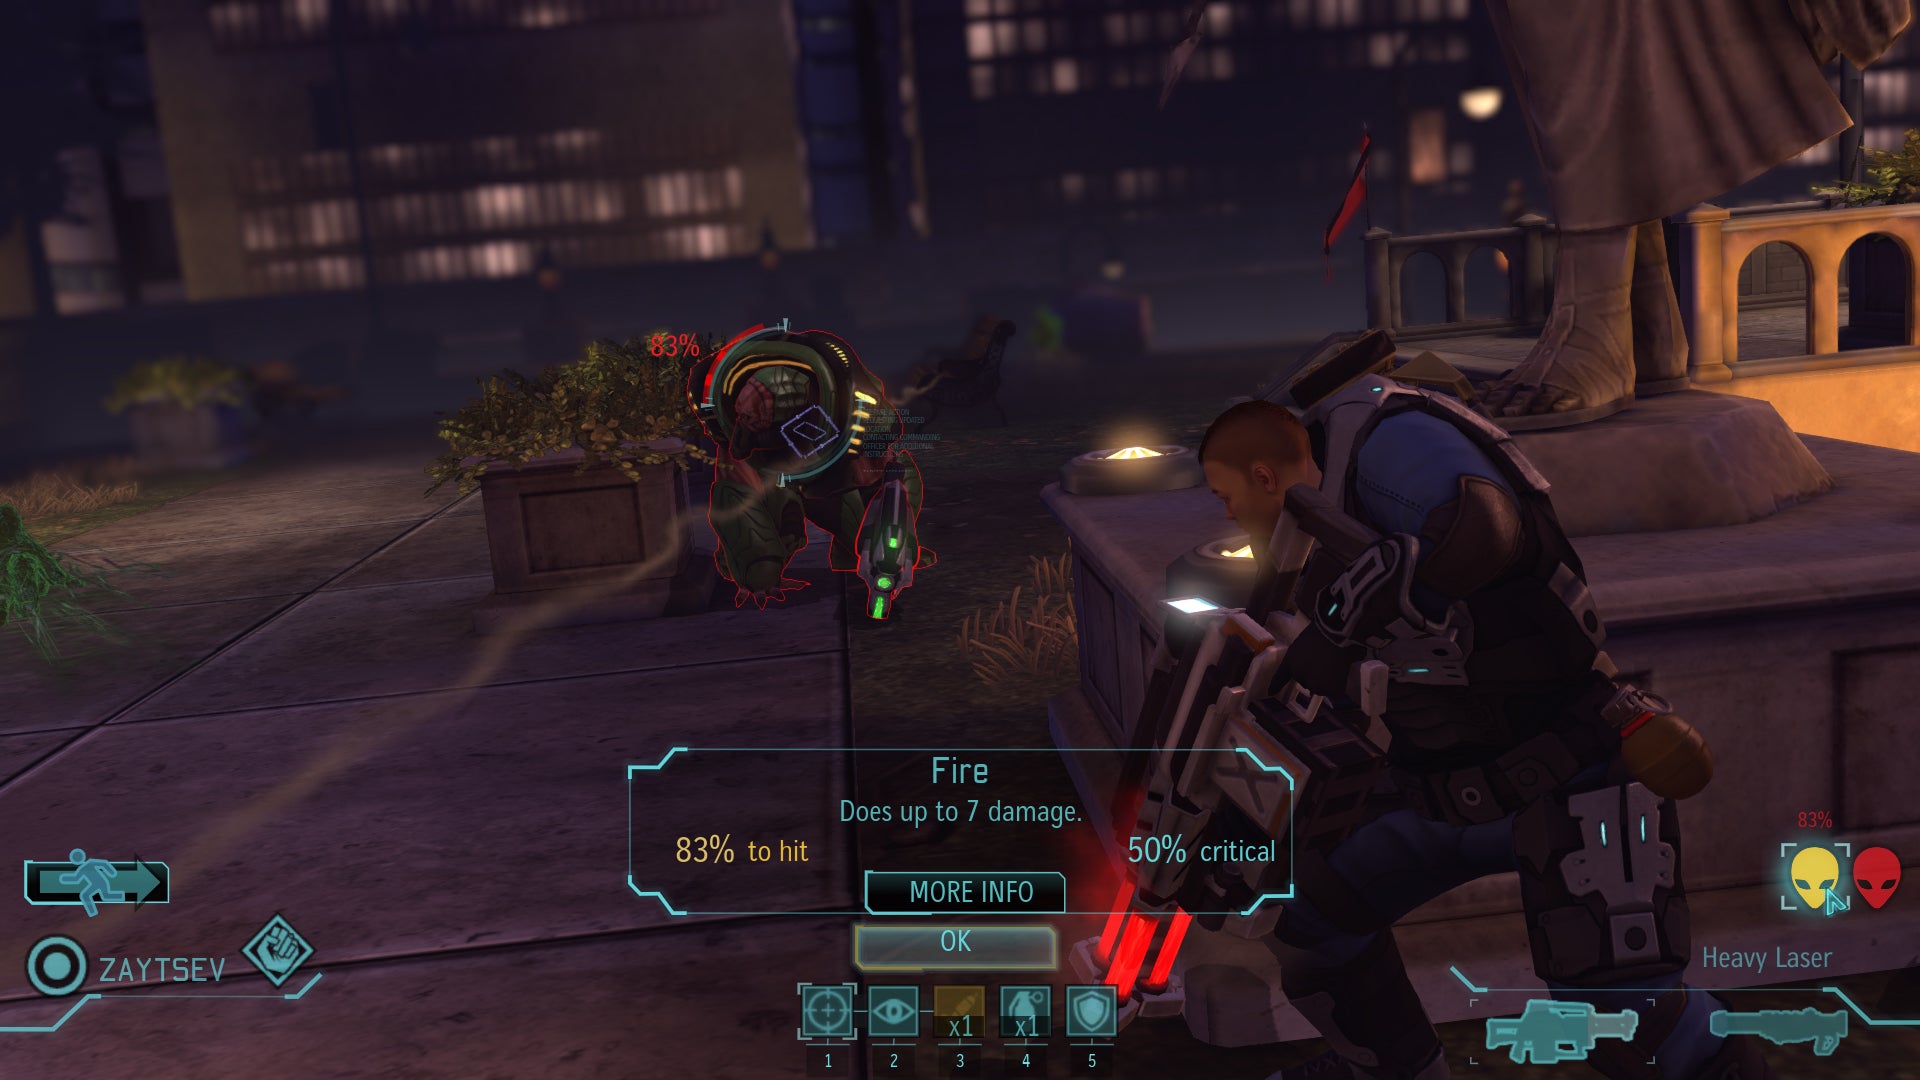 Aiming at a Muton in an XCOM: Enemy Unknown screenshot.